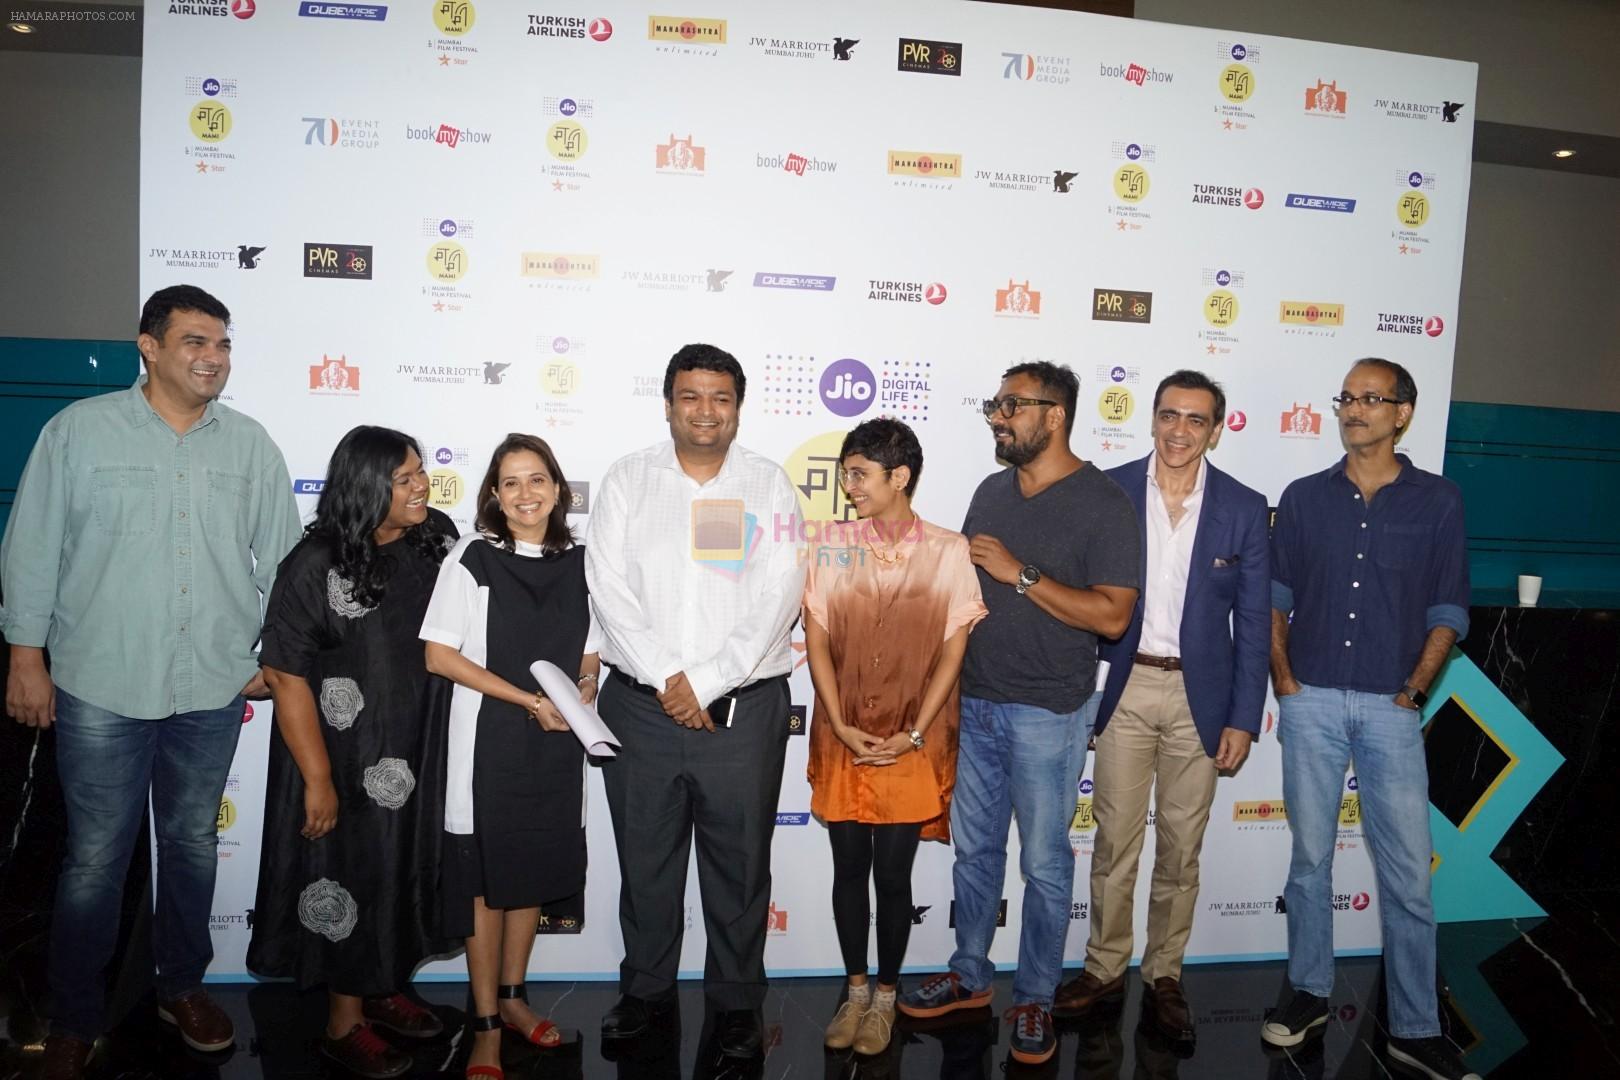 Kiran Rao, Anurag Kashyap, Siddharth Roy Kapoor, Rohan Sippy at the press conference of Jio Mami Festival 2017 on 14th Sept 2017